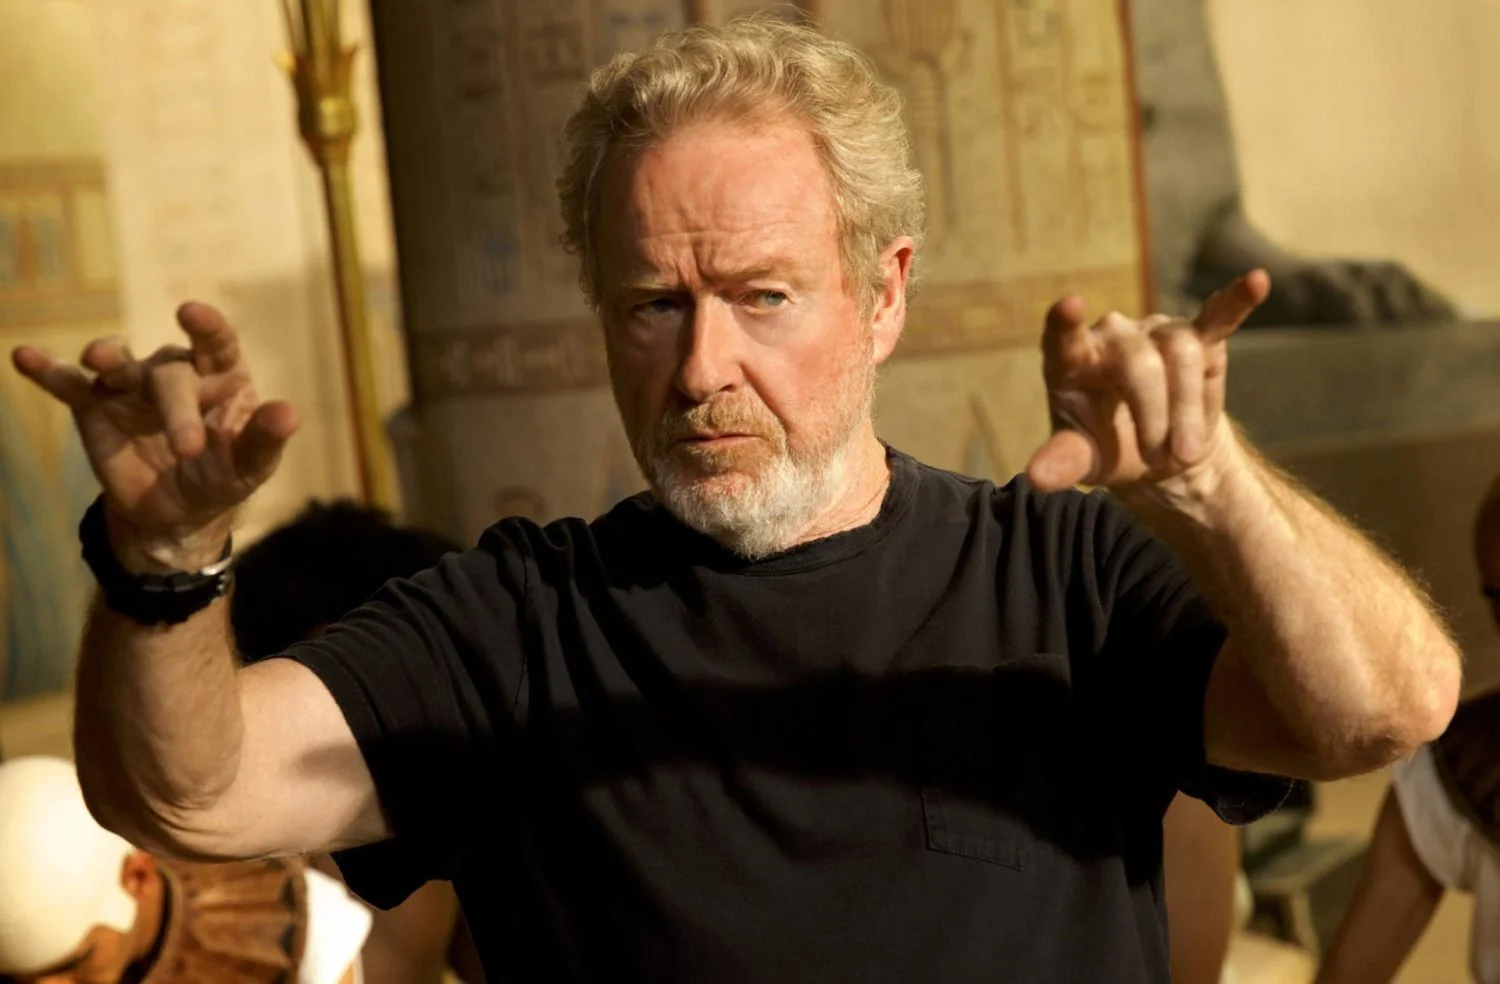 Ridley Scott is making a film about cryptocurrency